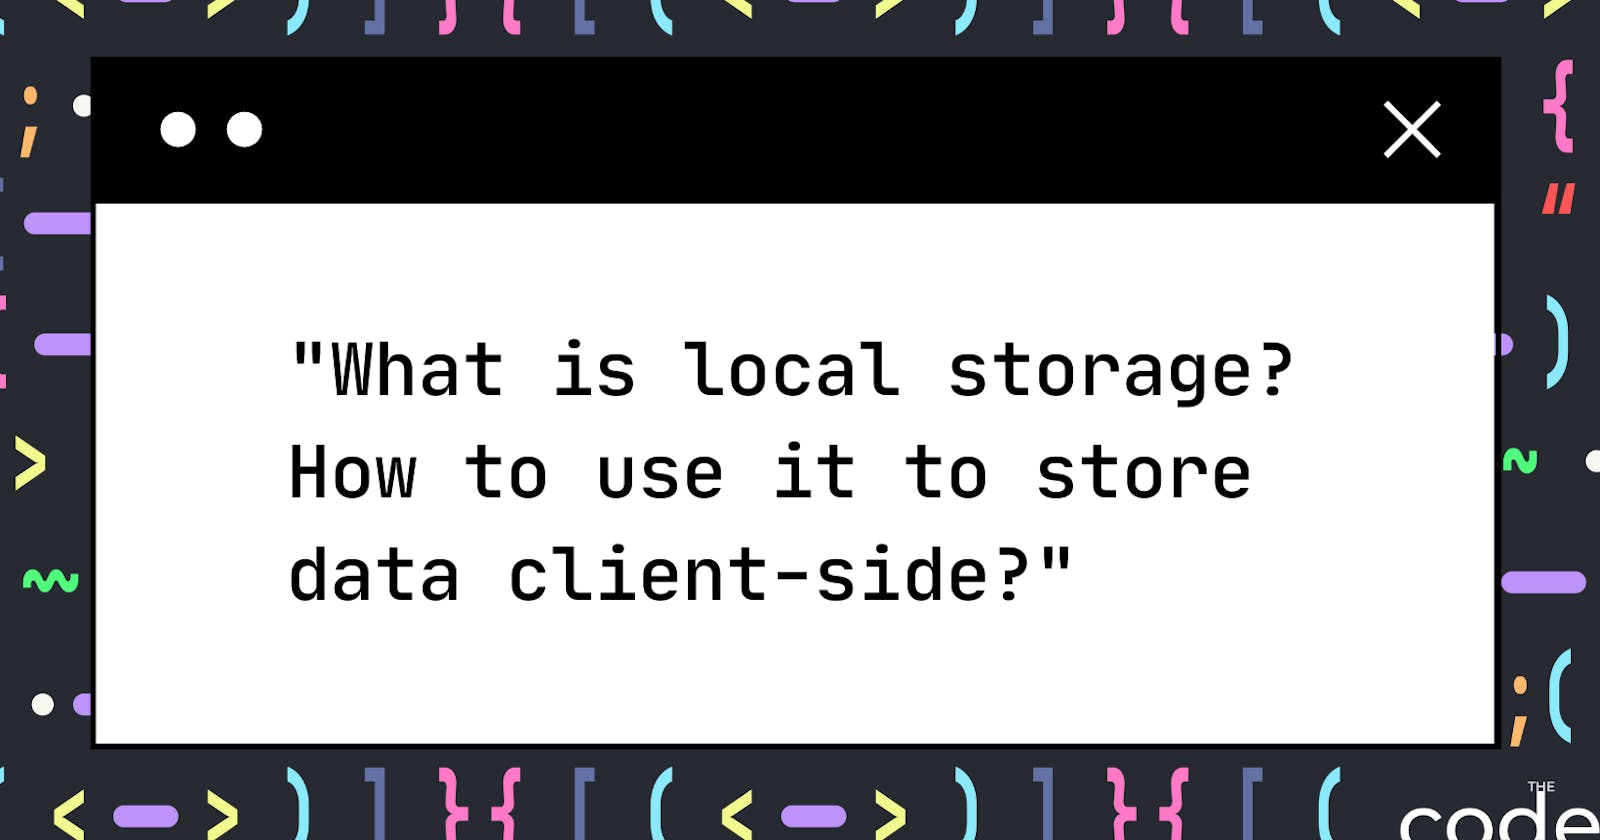 What is local storage? How to use it to store data client-side?